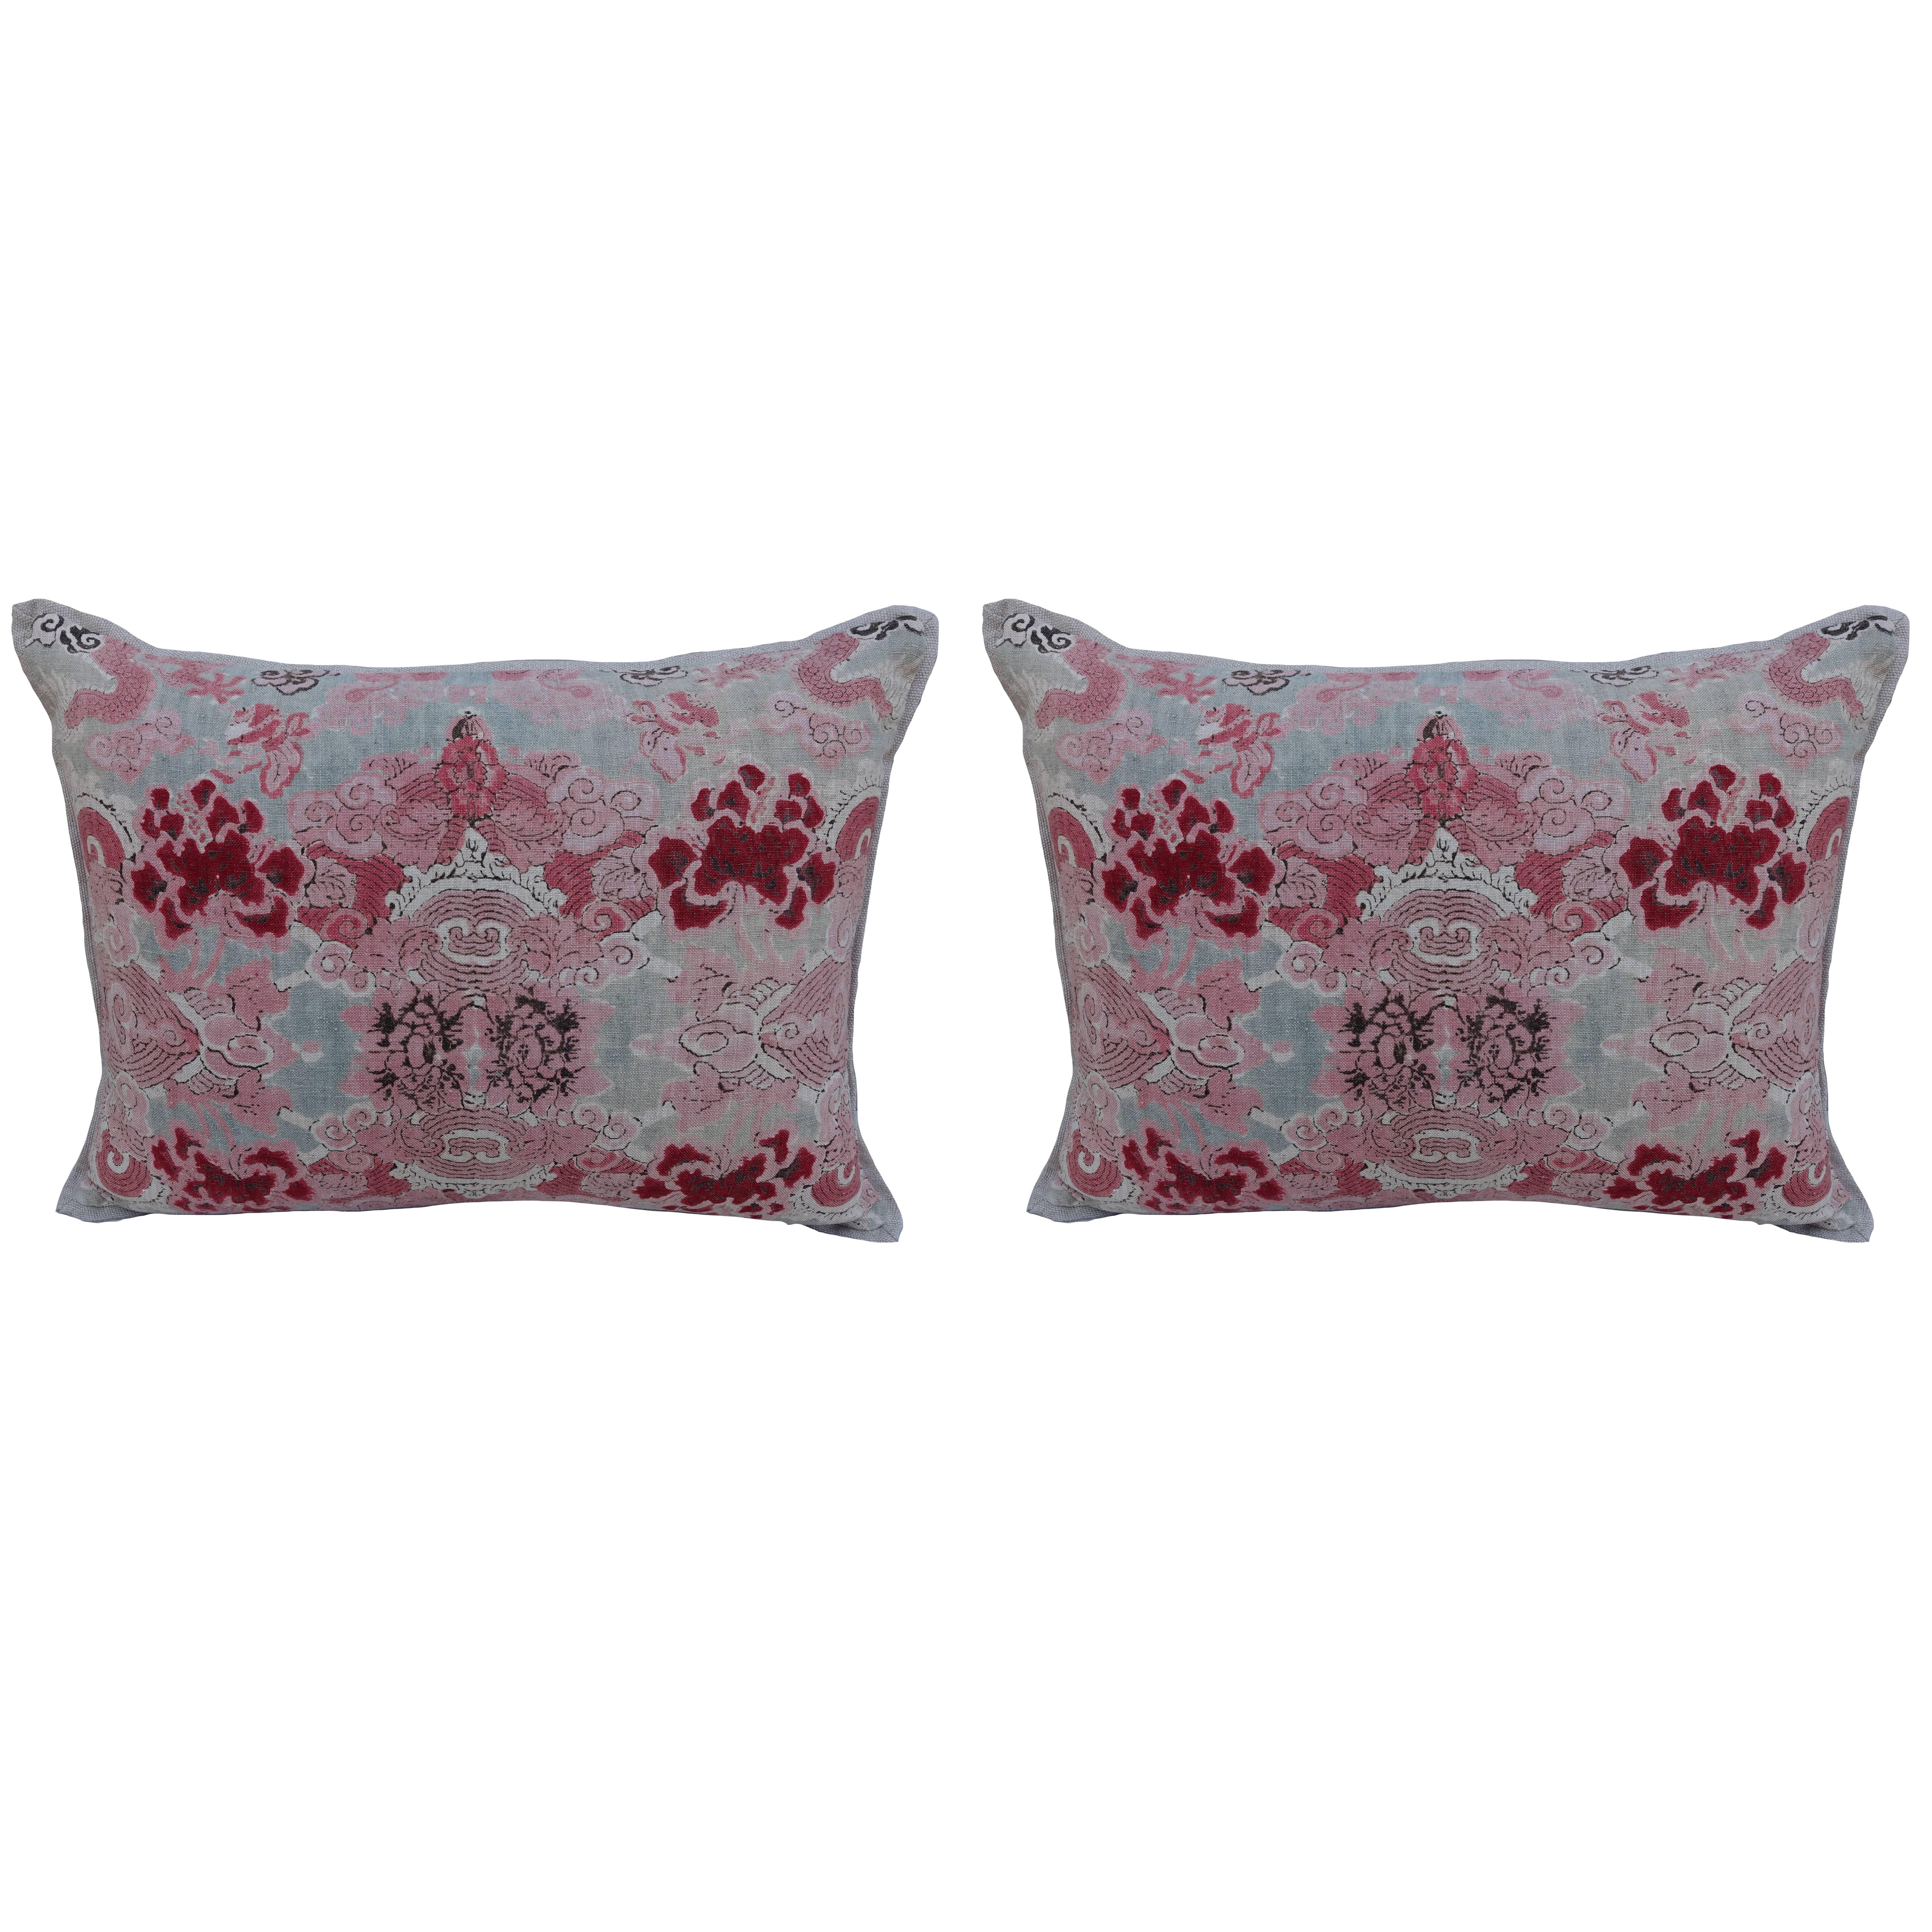 Pair of Vintage Chinoiserie Printed Linen Pillows